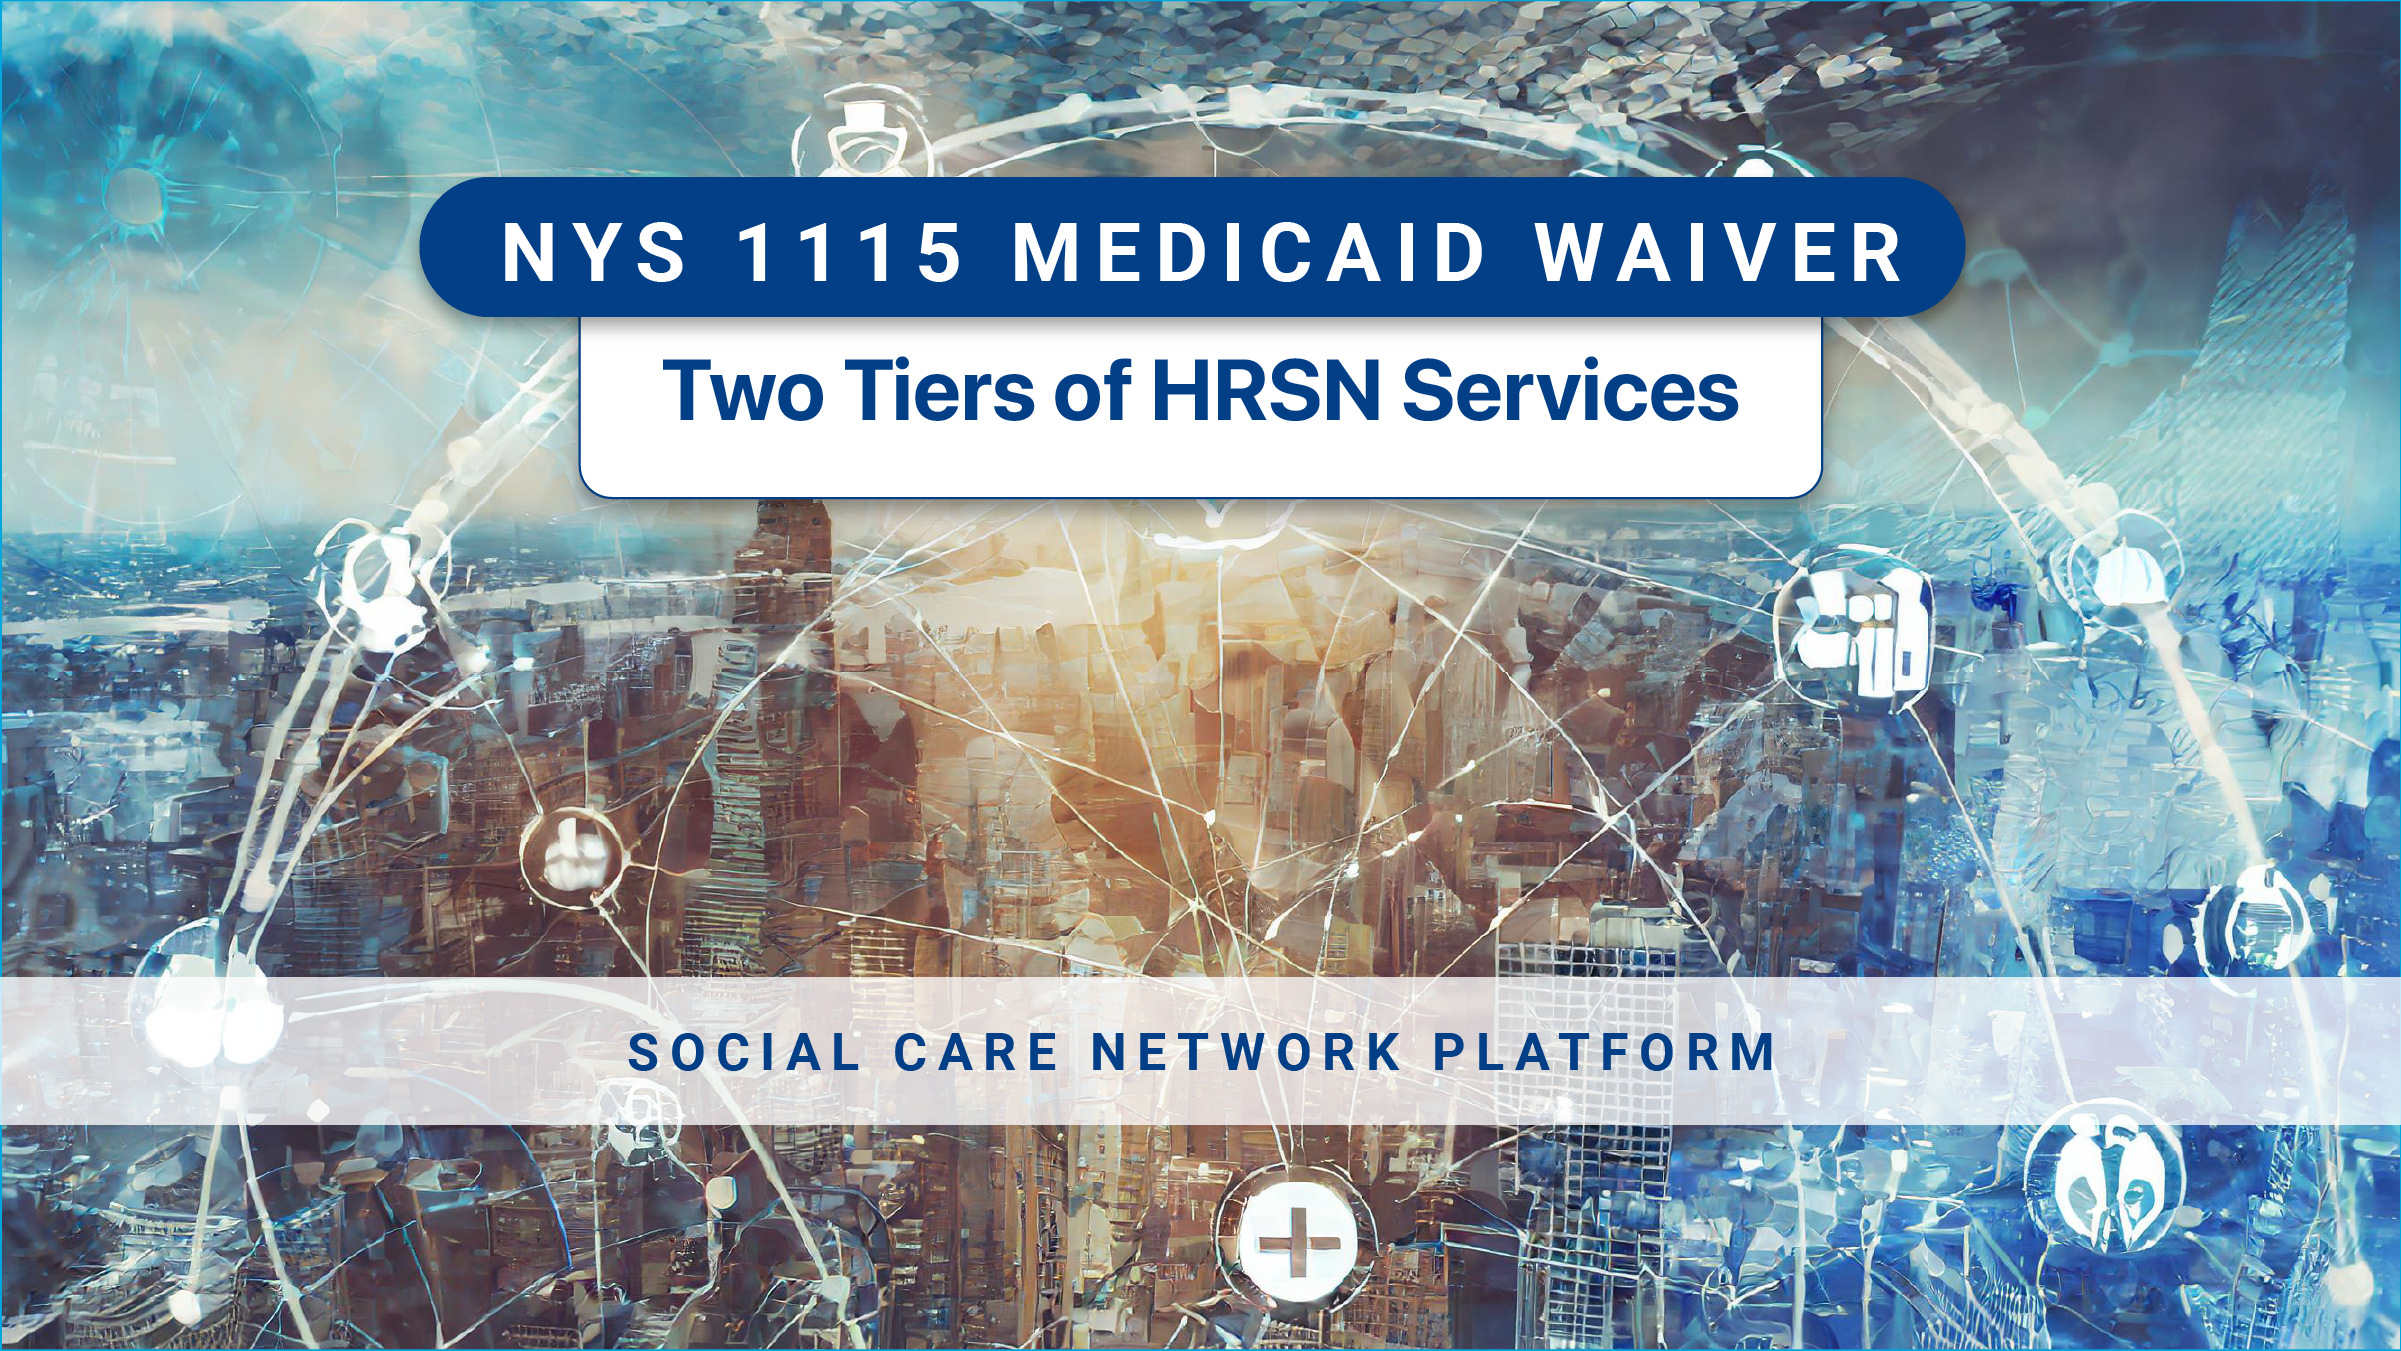 NYS 1115 Waiver - HRSN Services